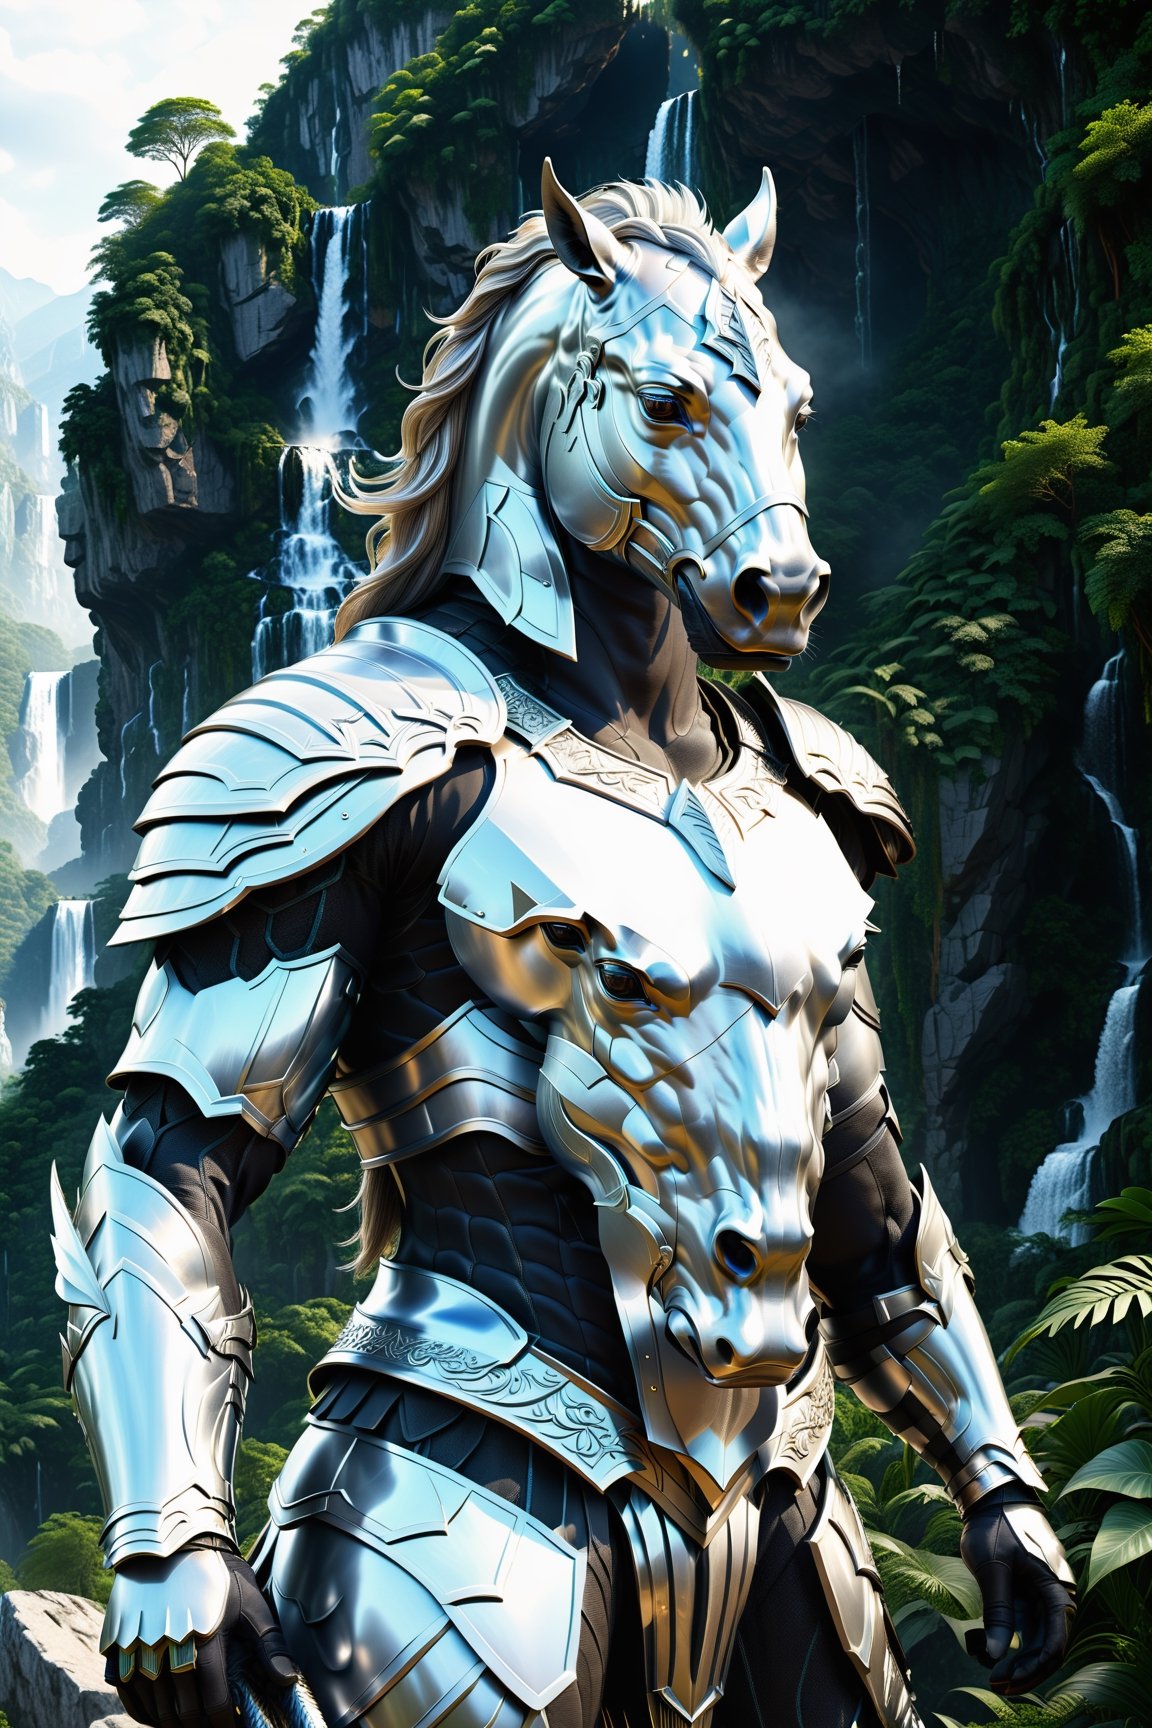 High definition photorealistic render of a incredible and mysterious mythological character of a warrior head horse animal beautifull this only head fusioned whit body men full body men, warrior gladiator armor mistycal full body, in a dense and thick jungle with mountains, trees with lianas and giant rocks with waterfall. whit luxury architecture parametric design in background, sky efect iridicent, blocks ice, with hypermaximalist details, marble, metal and glass parametric zaha hadid